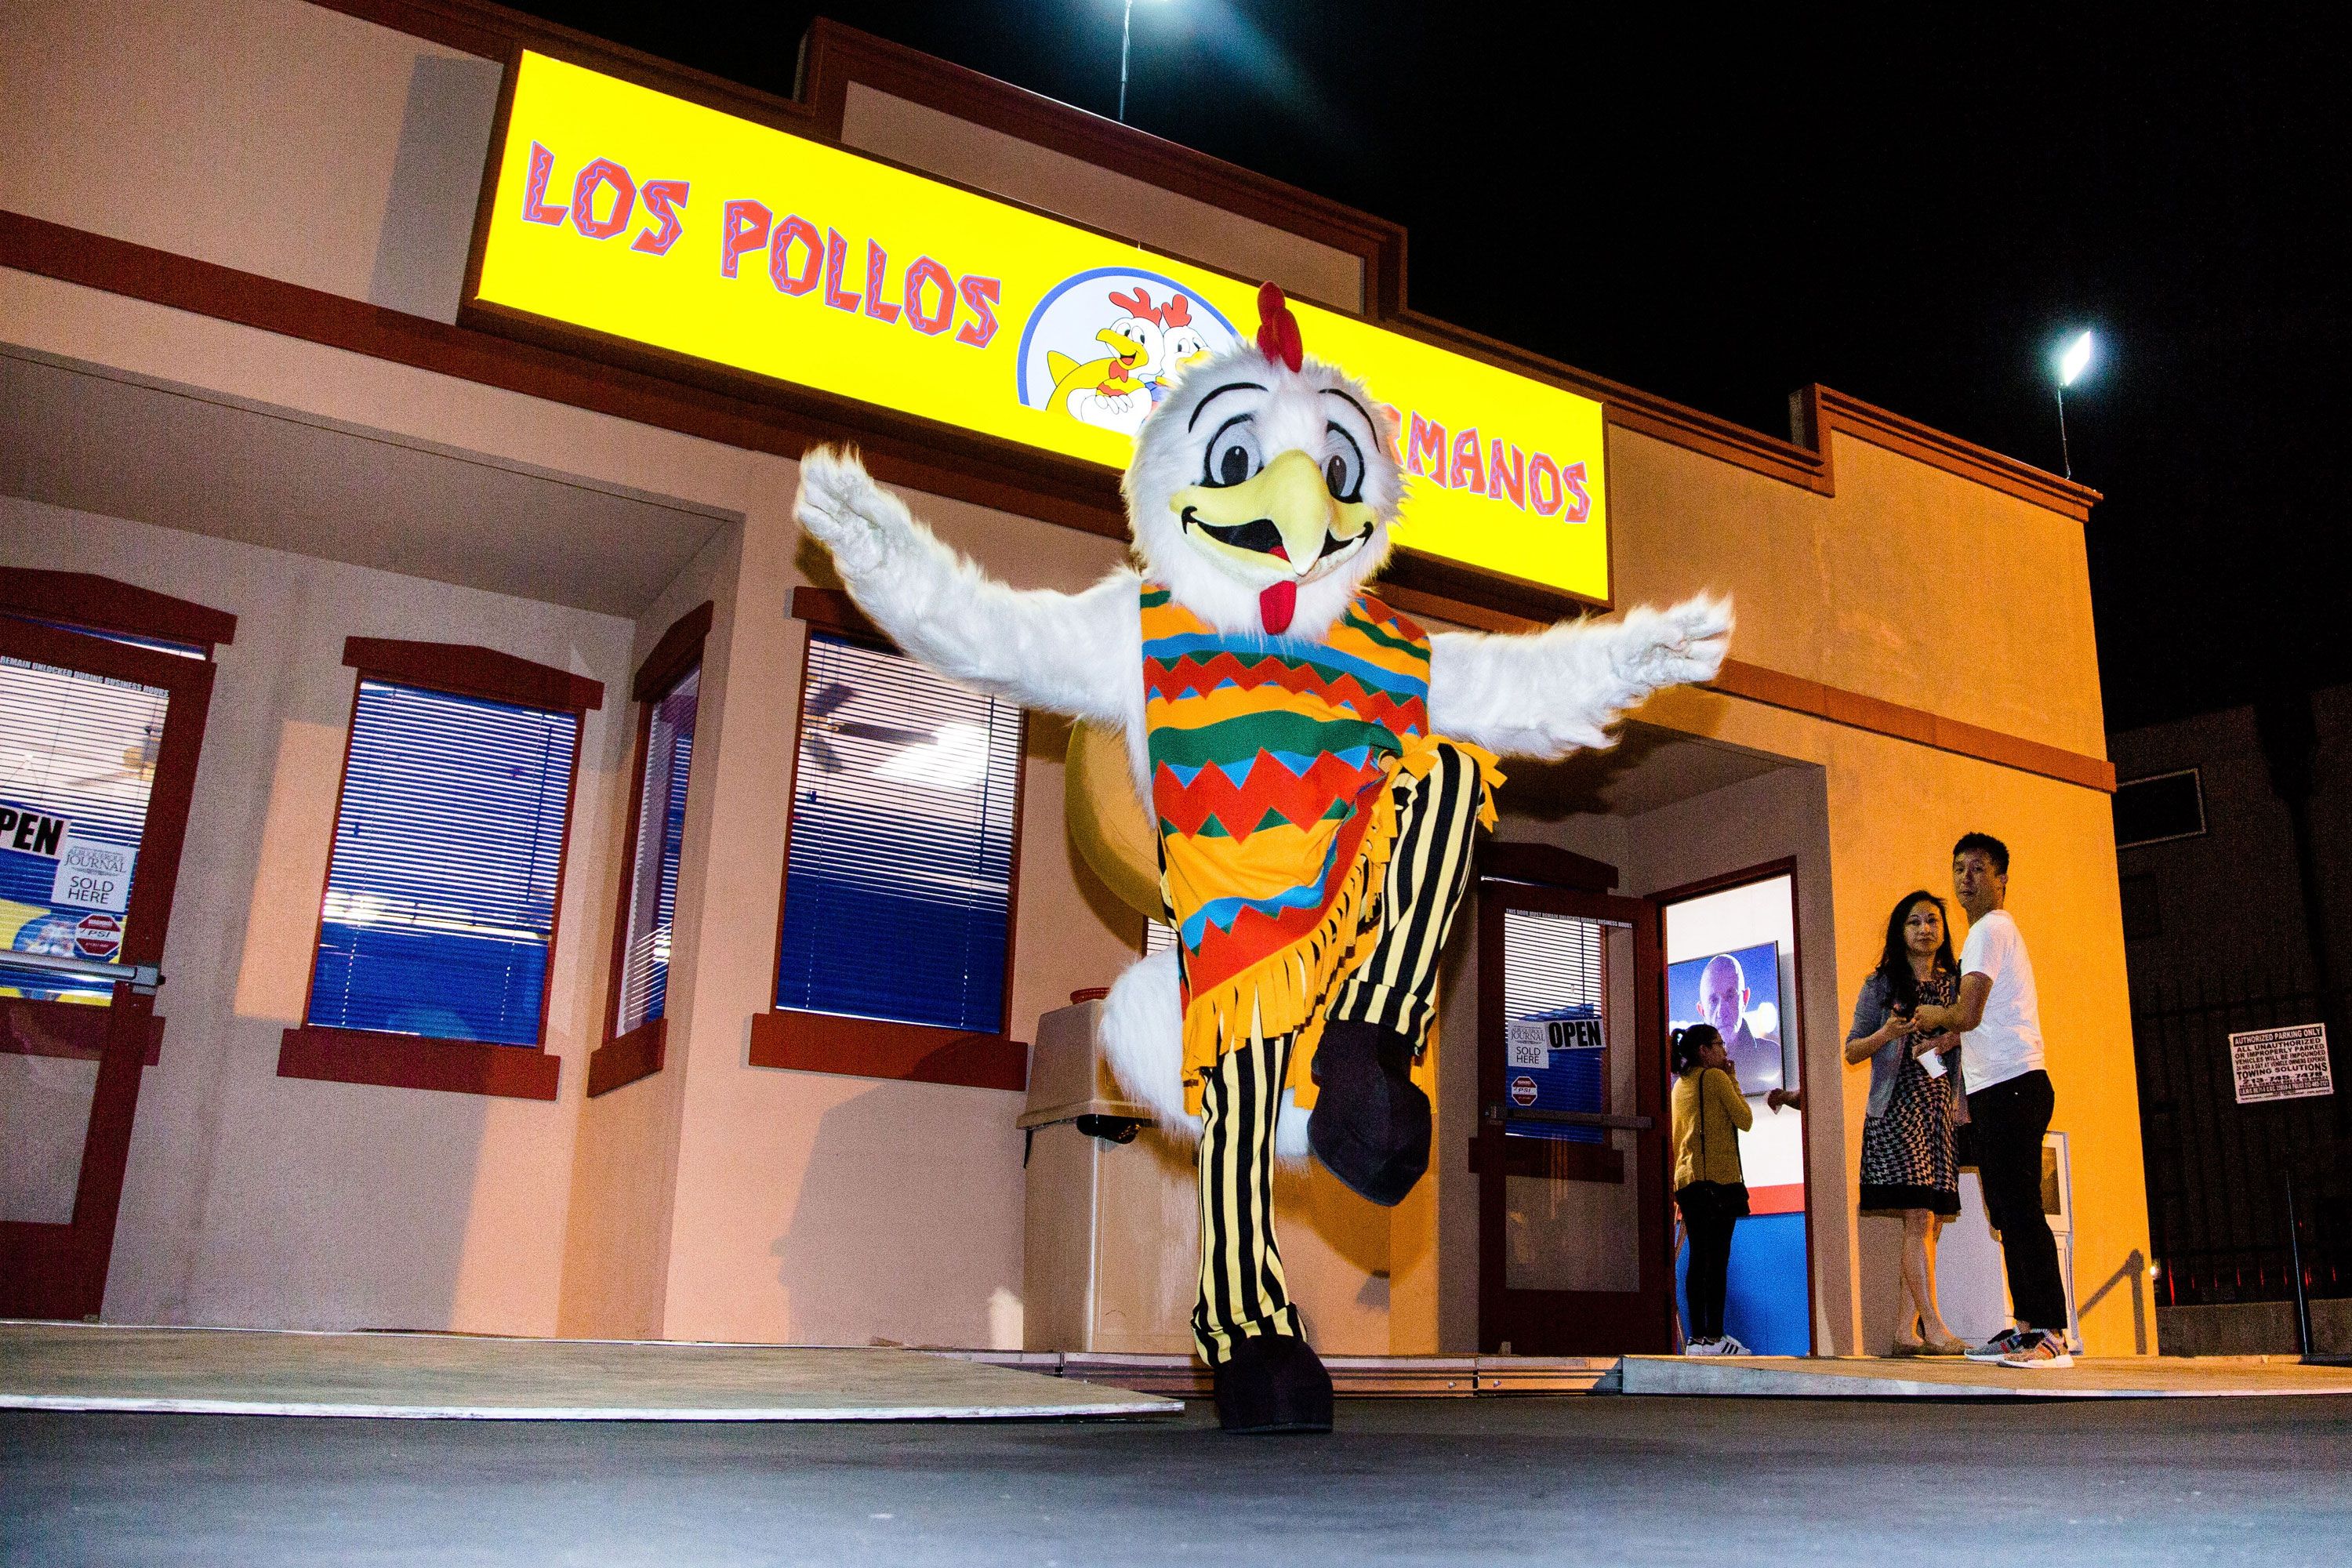 A real-life Los Pollos Hermanos restaurant from Breaking Bad is opening and  Gus Fring was there too